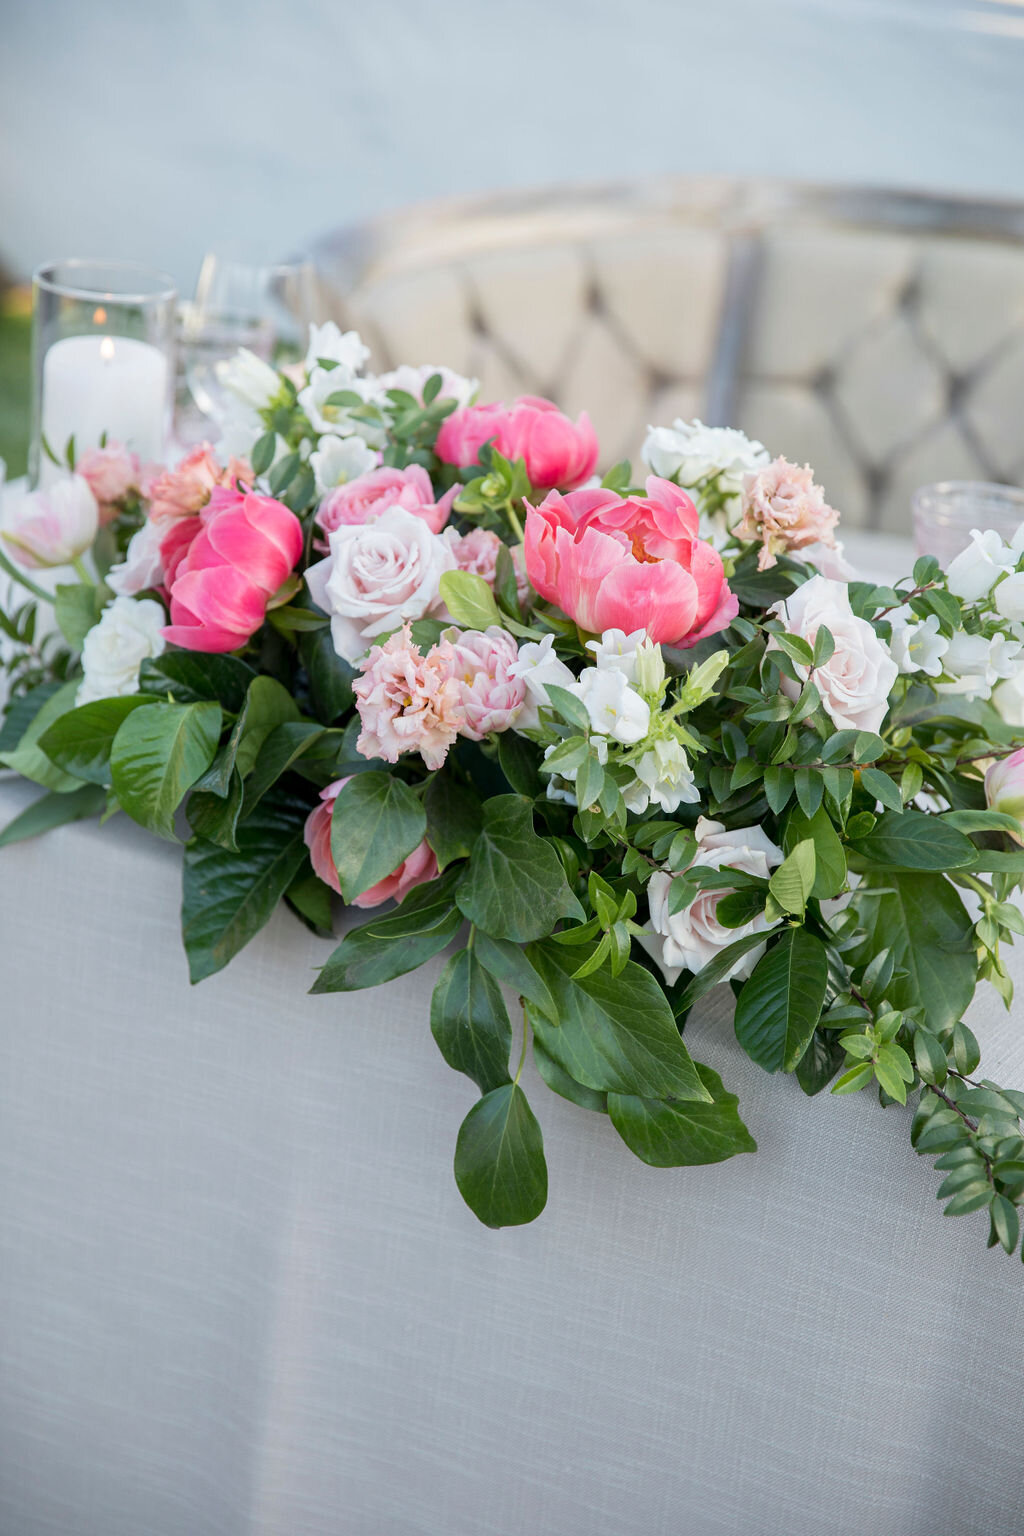 Sweetheart Table with Peonies and Roses.JPG